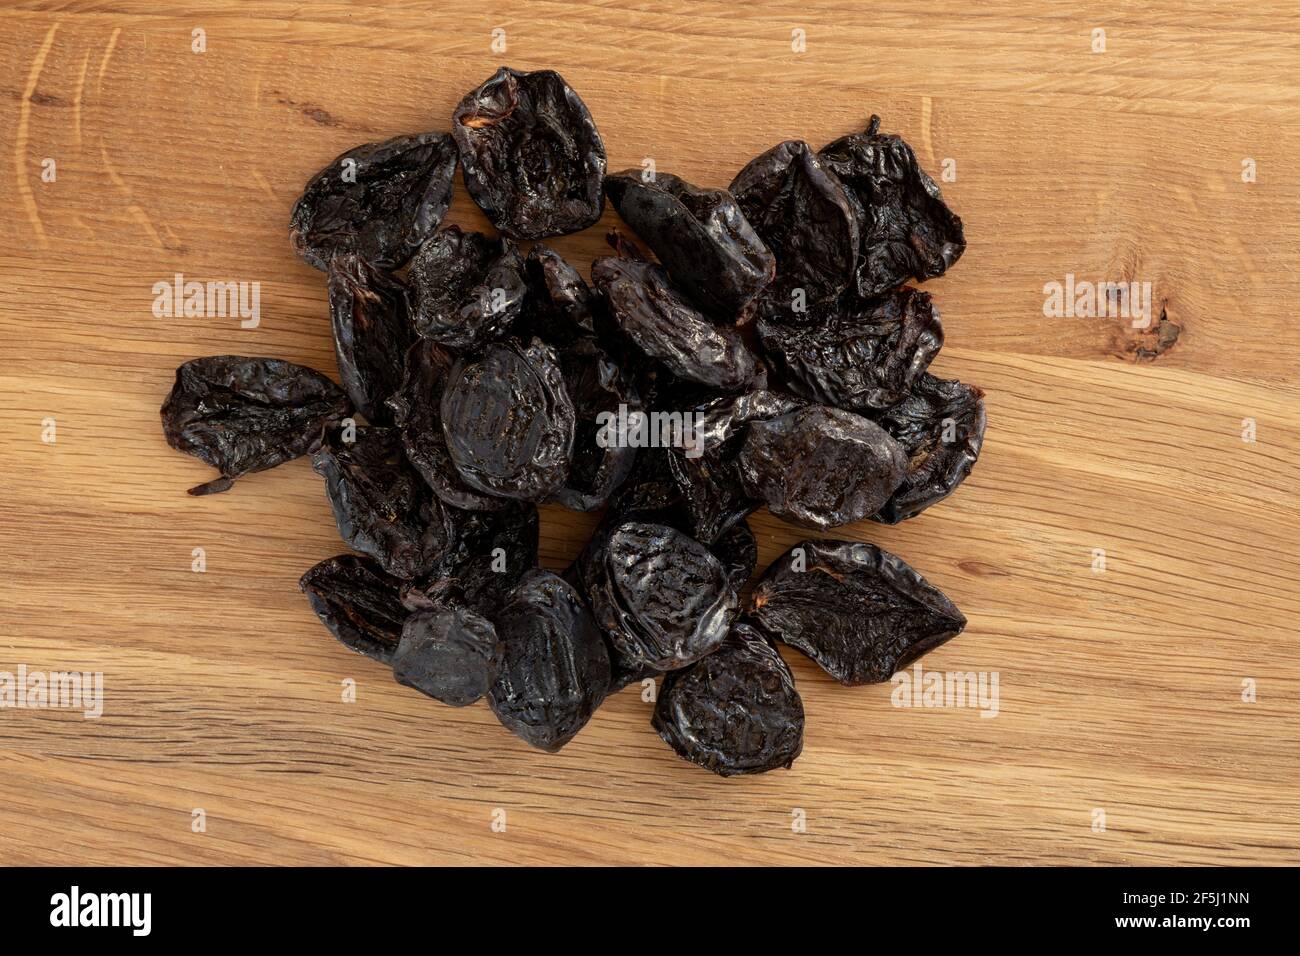 Pile of prunes, dry plums isolated on wood background. Heap of dried fruits. Stock Photo